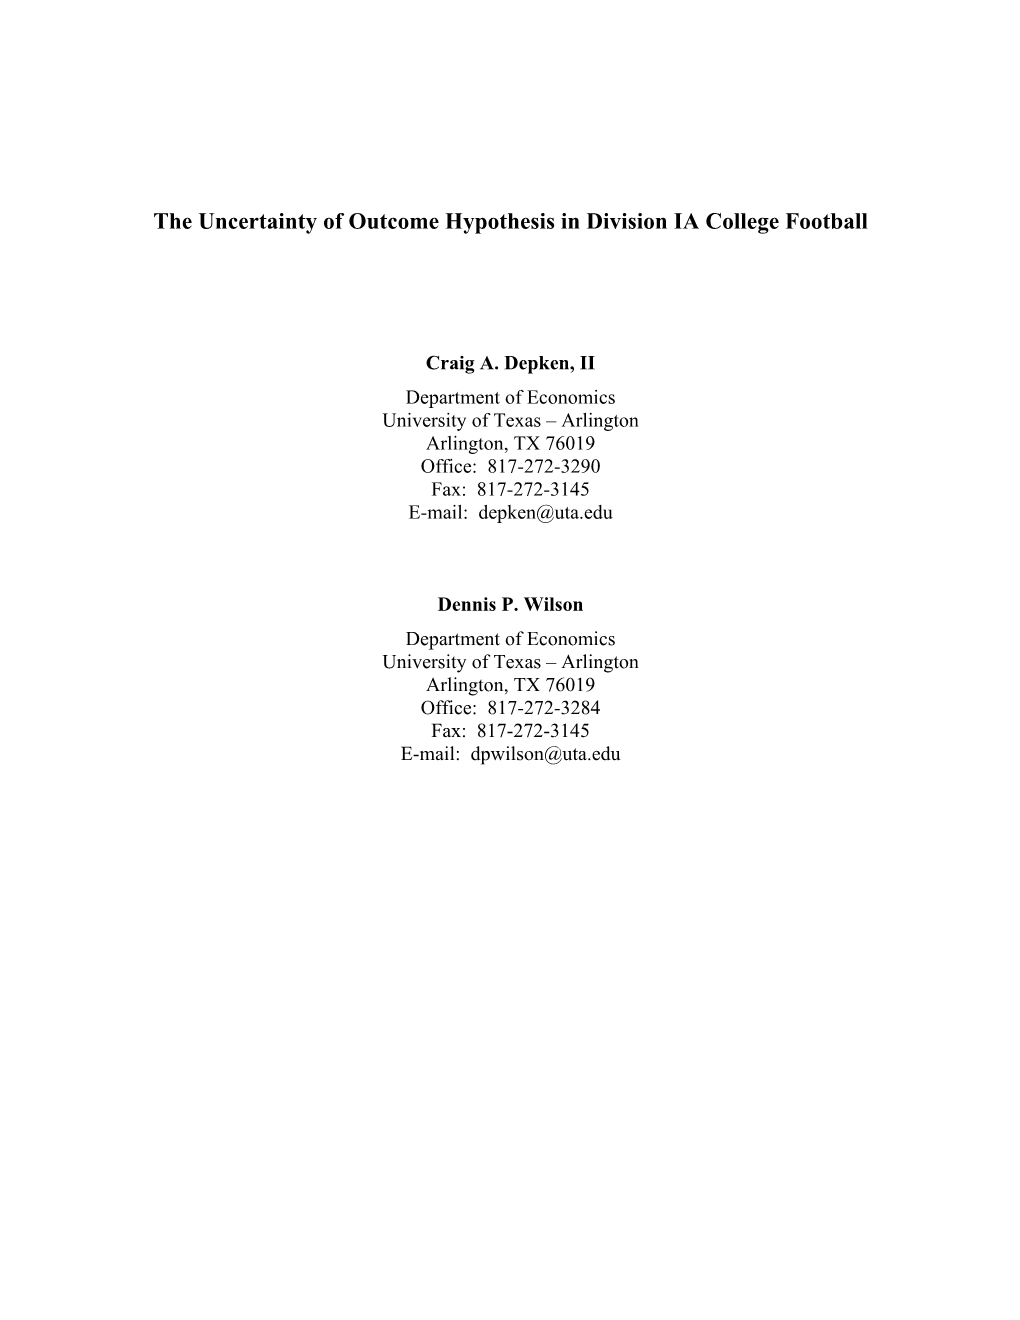 The Uncertainty of Outcome Hypothesis in Division IA College Football